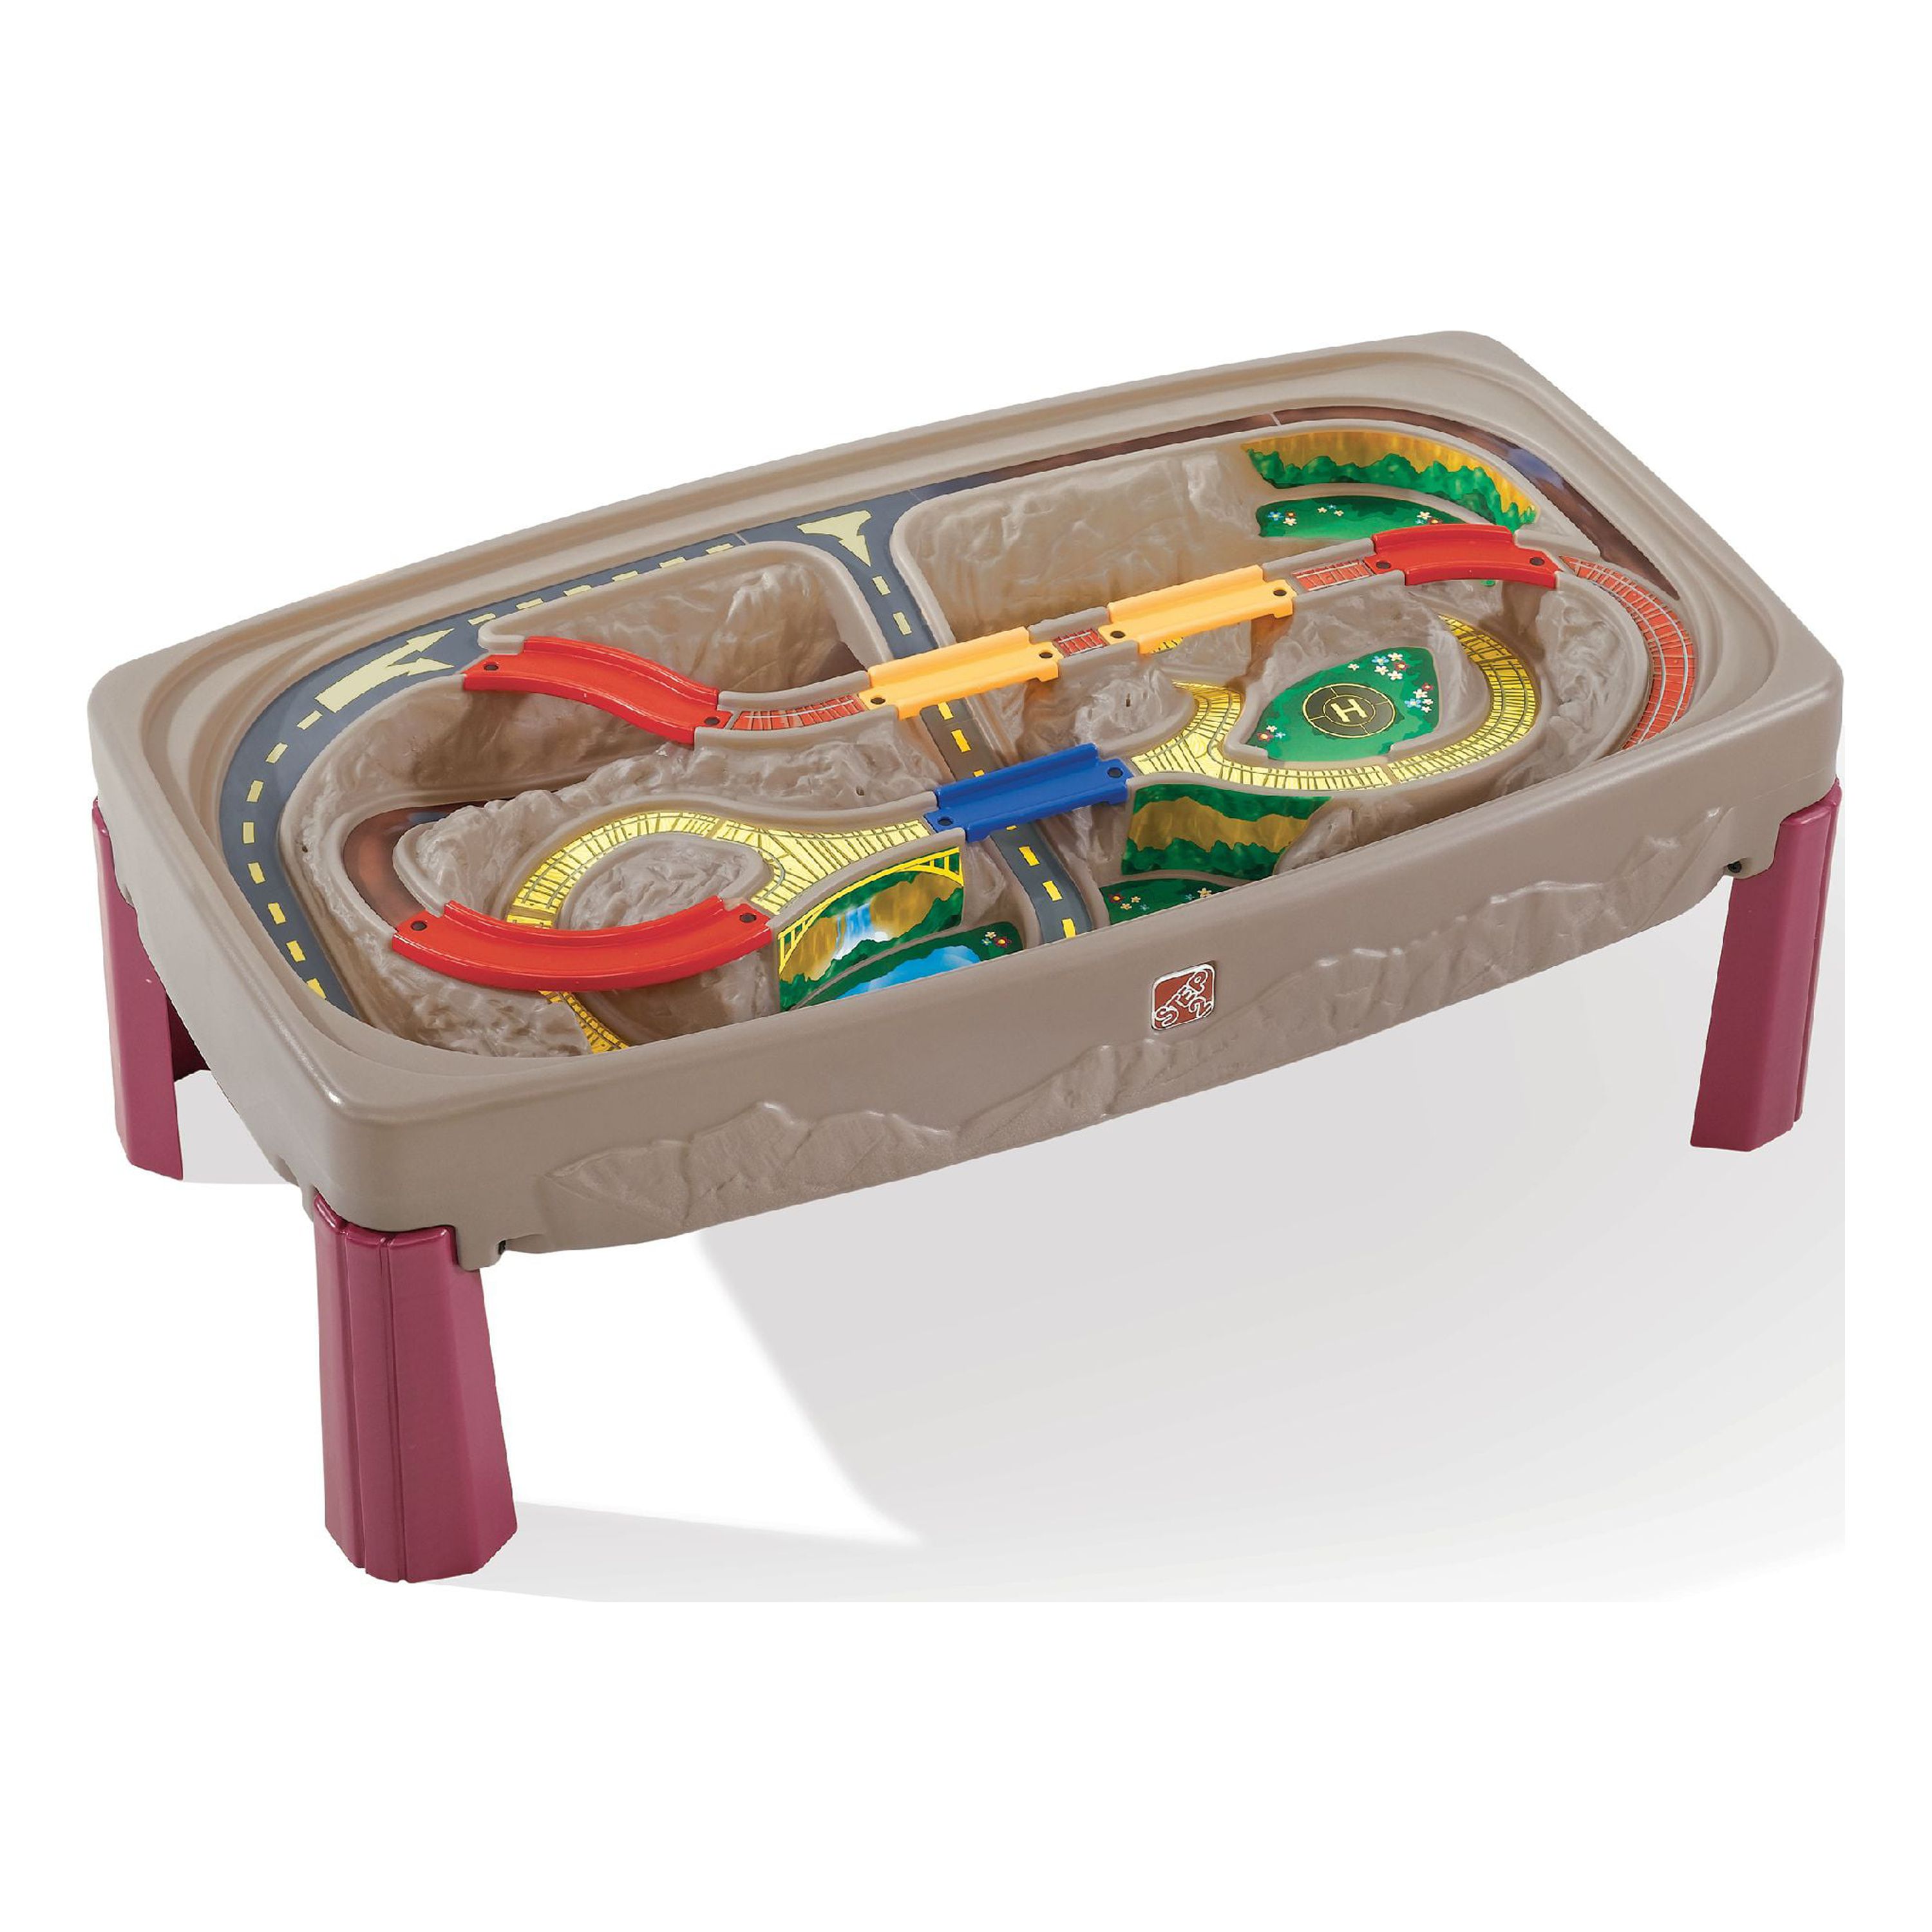 Step2 Deluxe Canyon Road Play Train Table Ages 2 to 6 Years - image 9 of 11